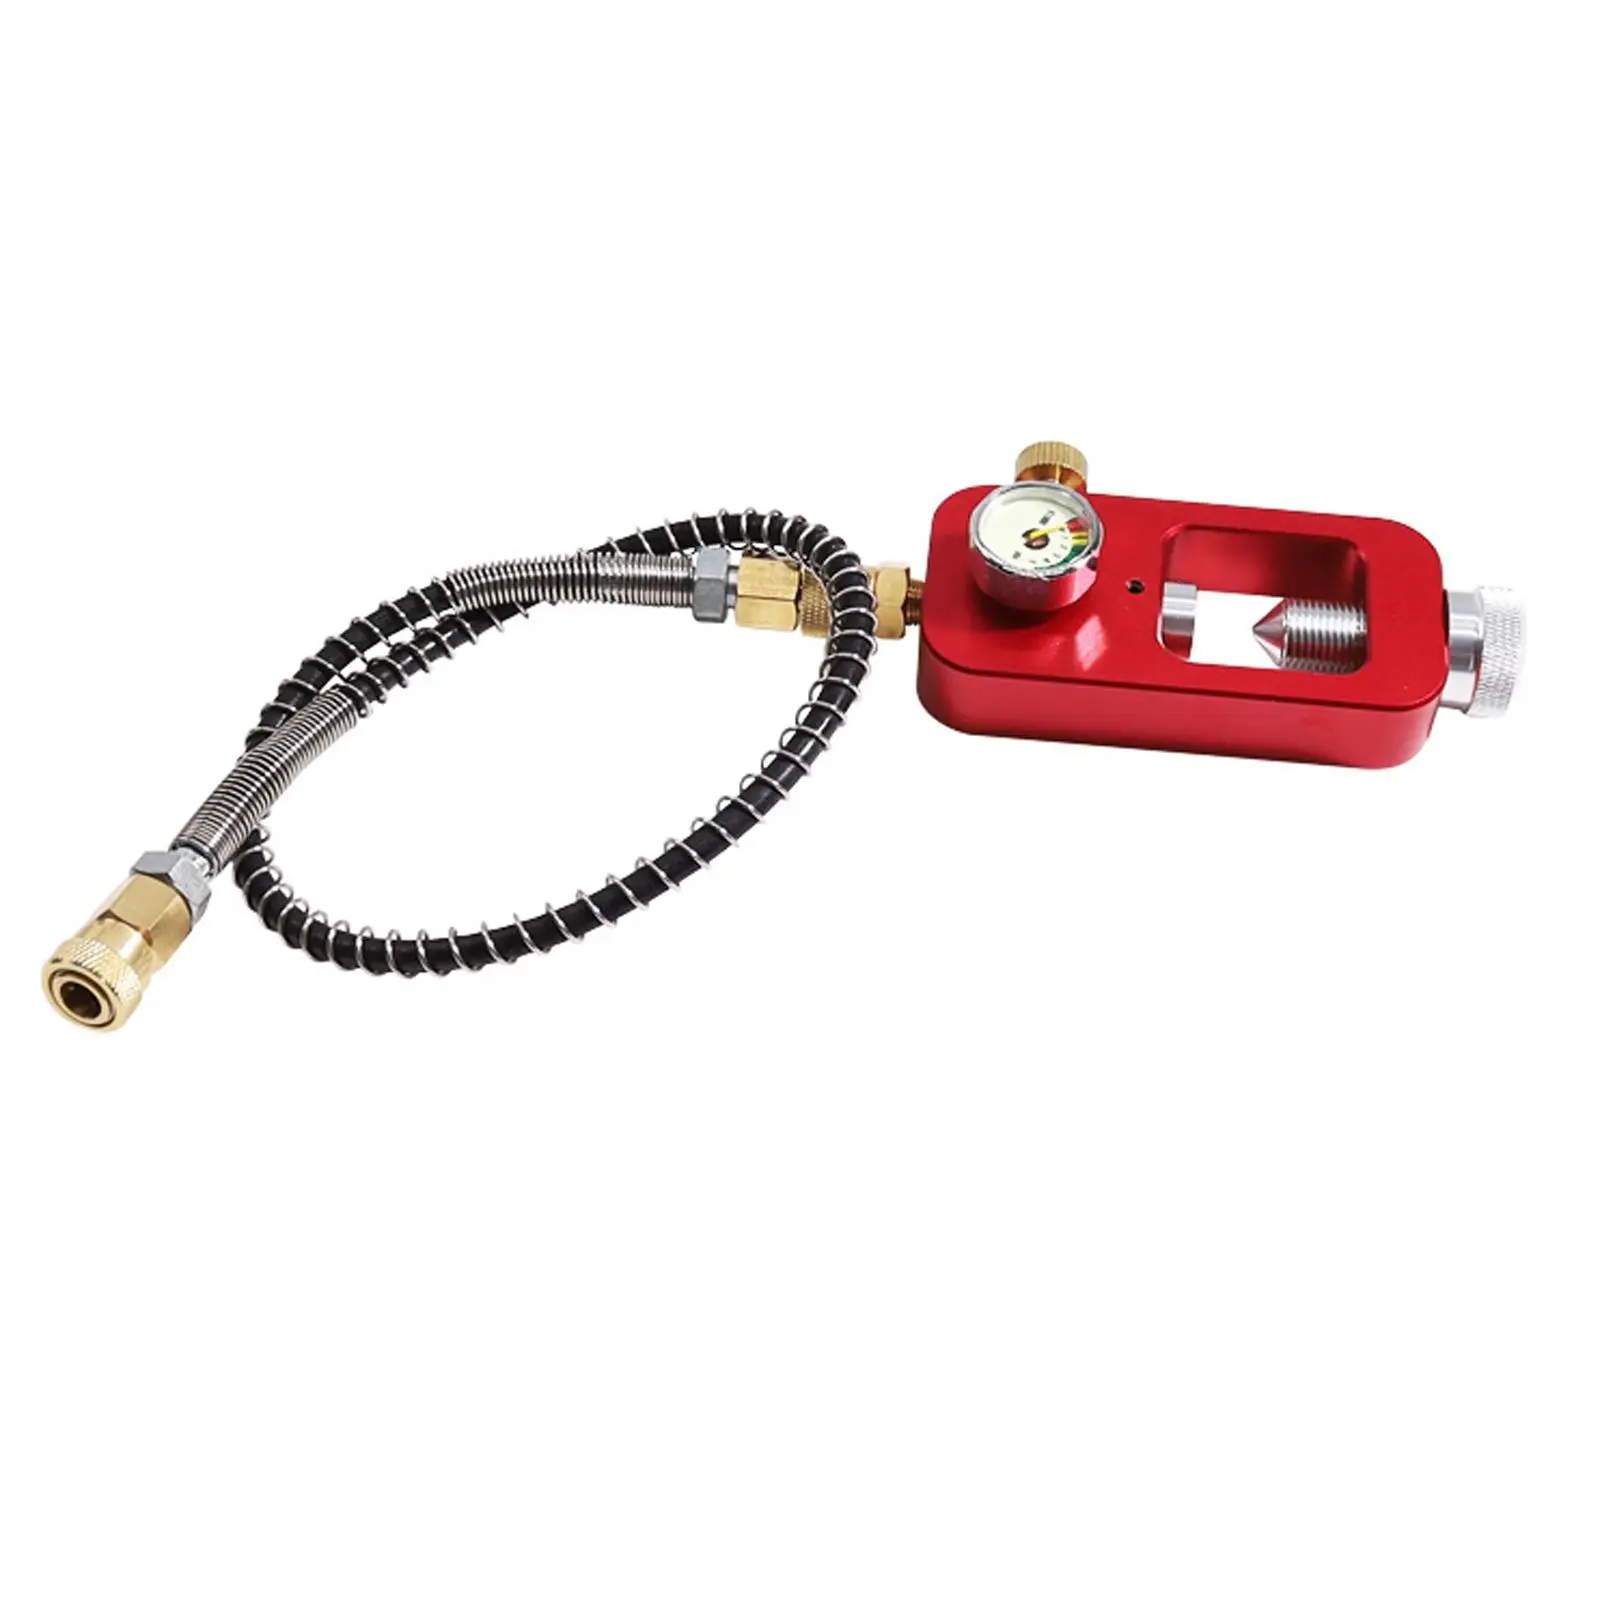 Scuba Cylinder Regulator 4500PSI High Pressure Tank Fill Station with Hose Charging System Filling Adapter Diameter 6mm 24inch